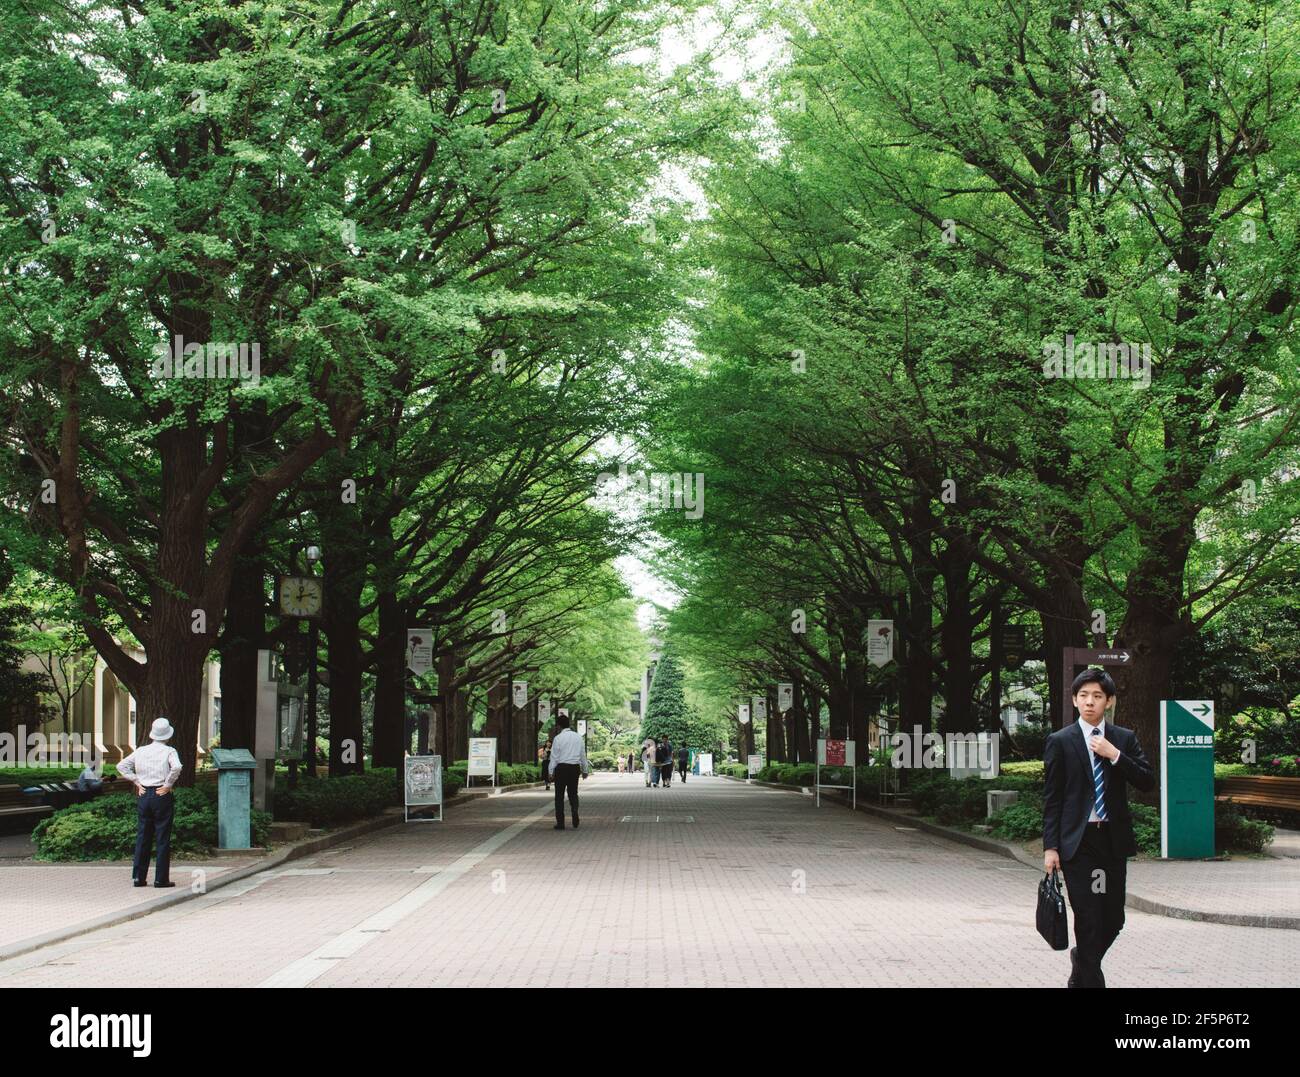 Shibuya, Tokyo, Japan - Aoyama Gakuin University, a private university located in downtown of Tokyo. Beautiful campus filled with leafy trees. Stock Photo